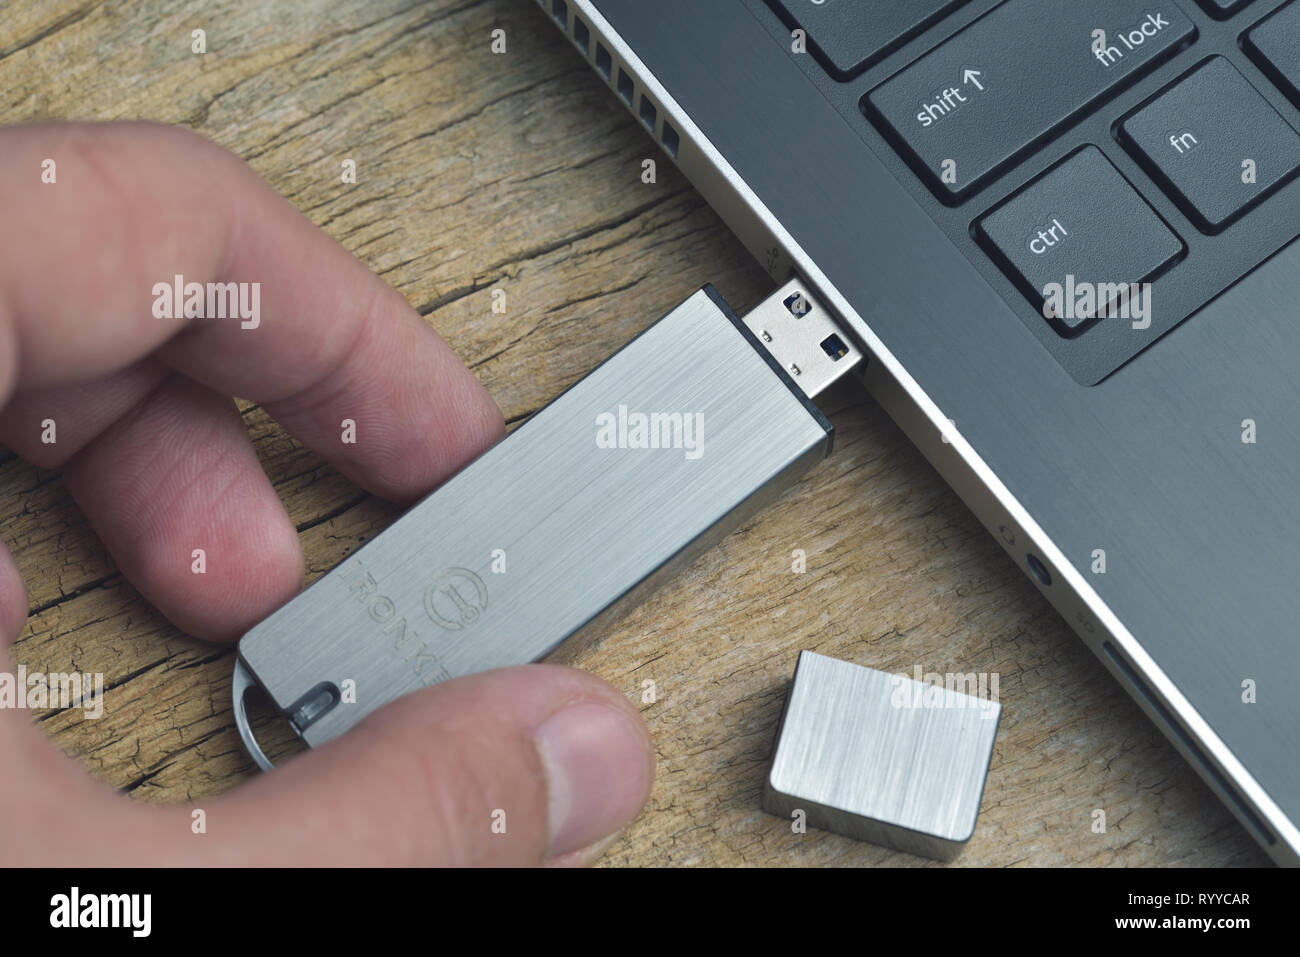 Galati, Romania - March 15, 2019: Close up of Kingston Ironkey ultra secure USB flash drive connected to laptop on wood desk Stock Photo